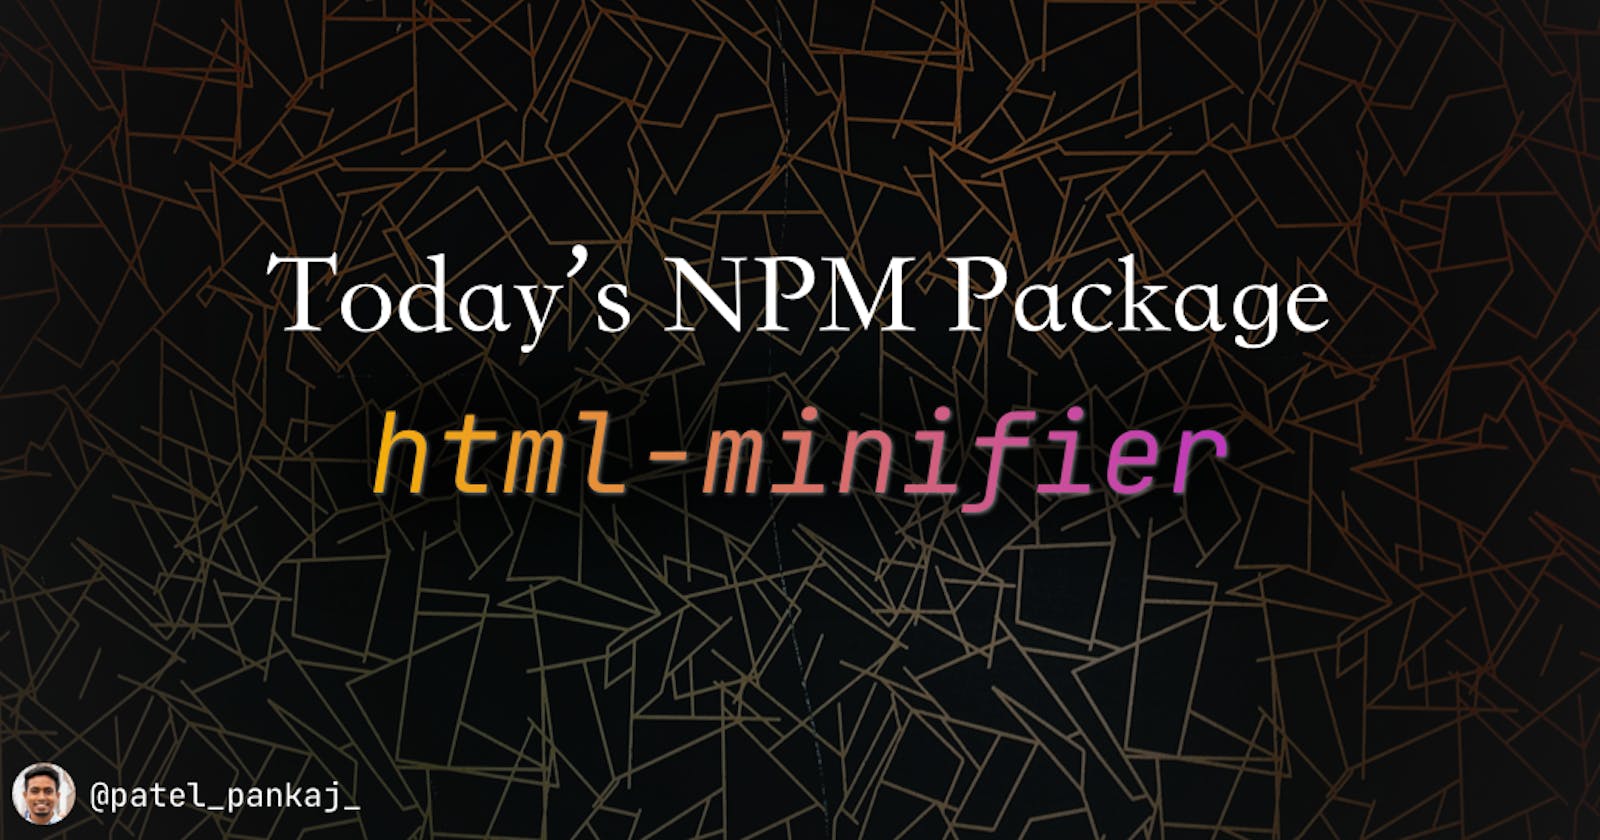 Today's npm package: html-minifier